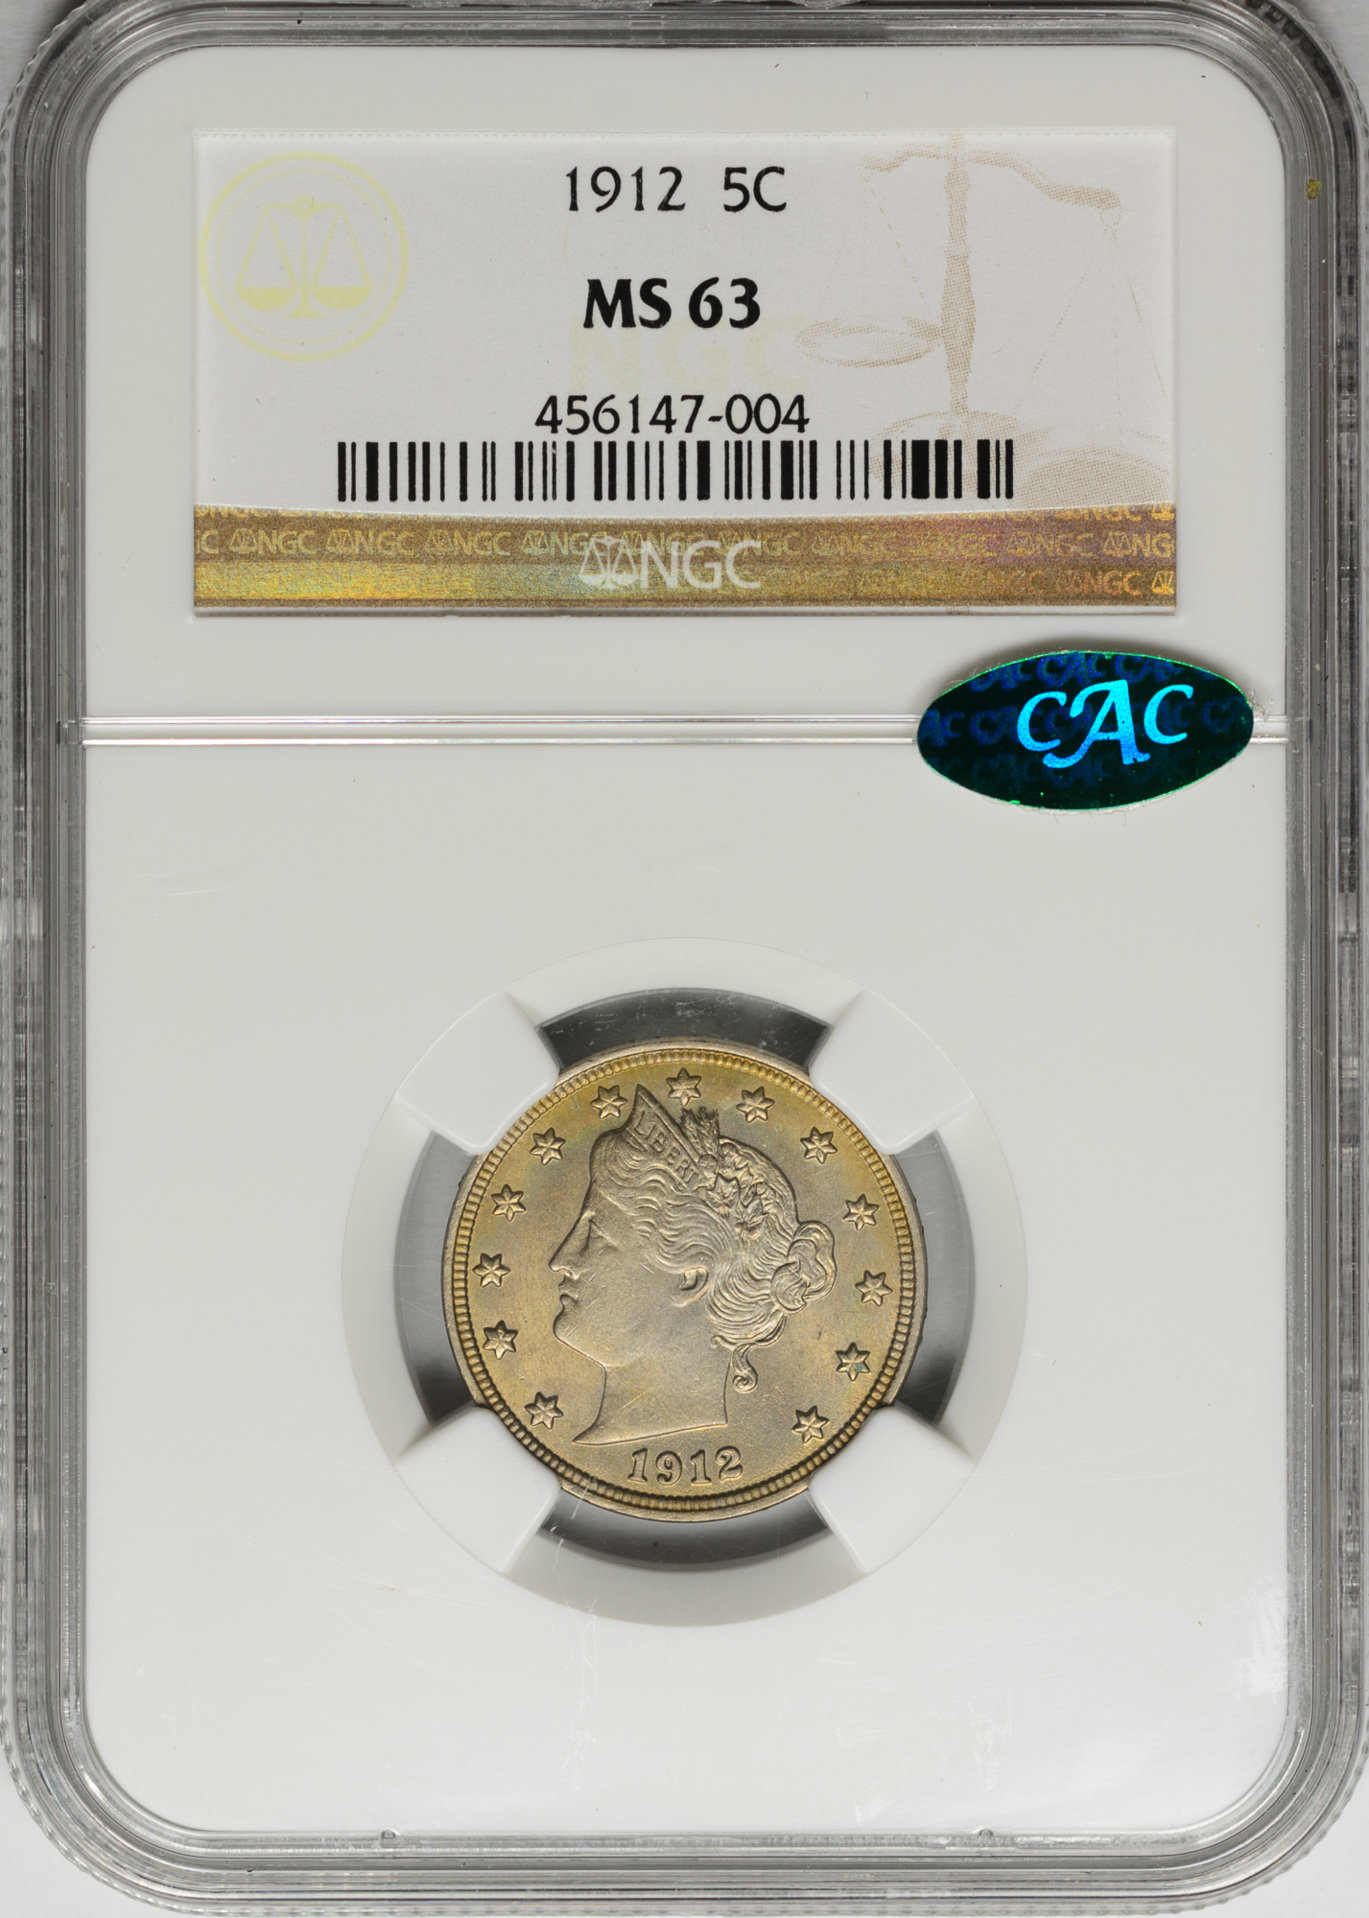 1912 5C FIVE-CENT PIECE - LIBERTY HEAD, CENTS NGC MS63 456147-004 CAC Obv Slab v2.jpg